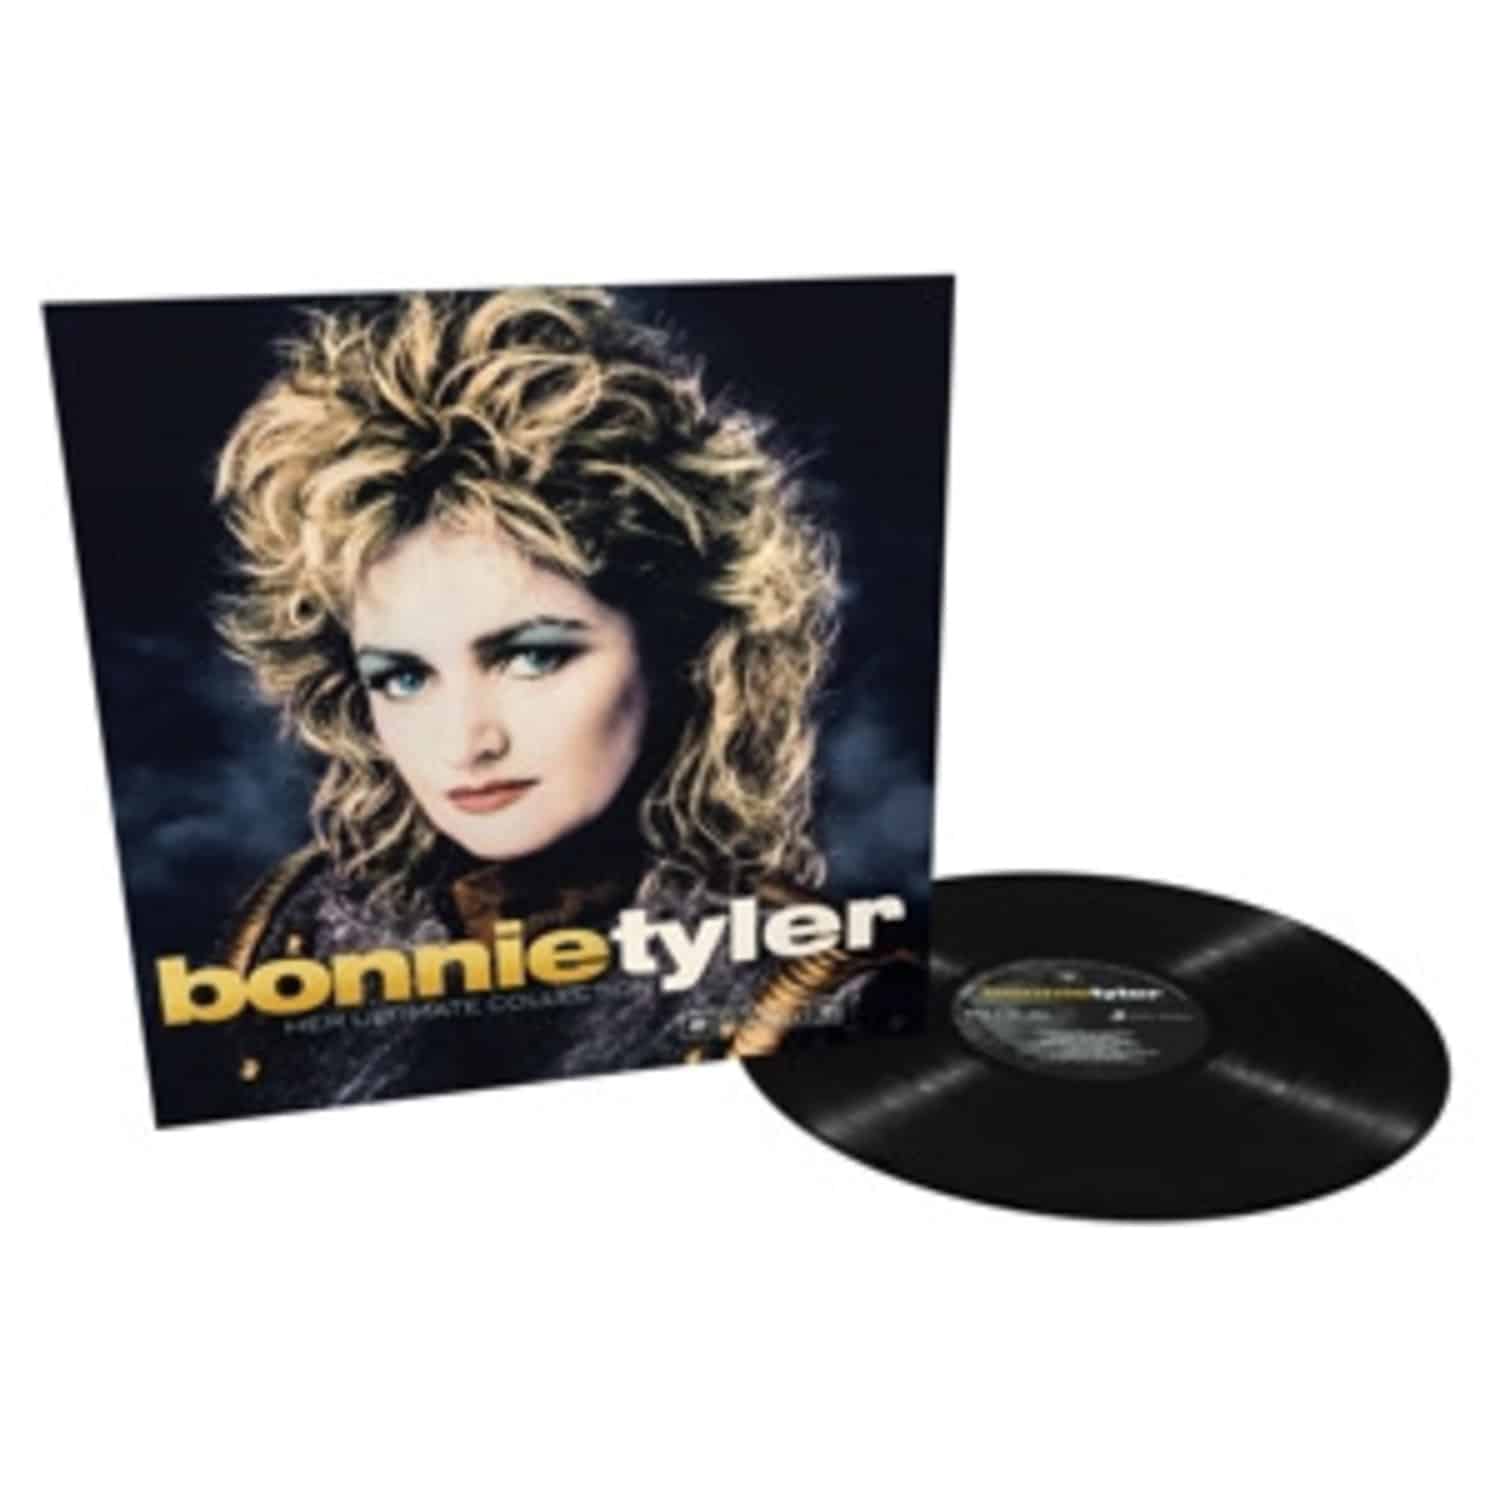 Bonnie Tyler - HER ULTIMATE COLLECTION